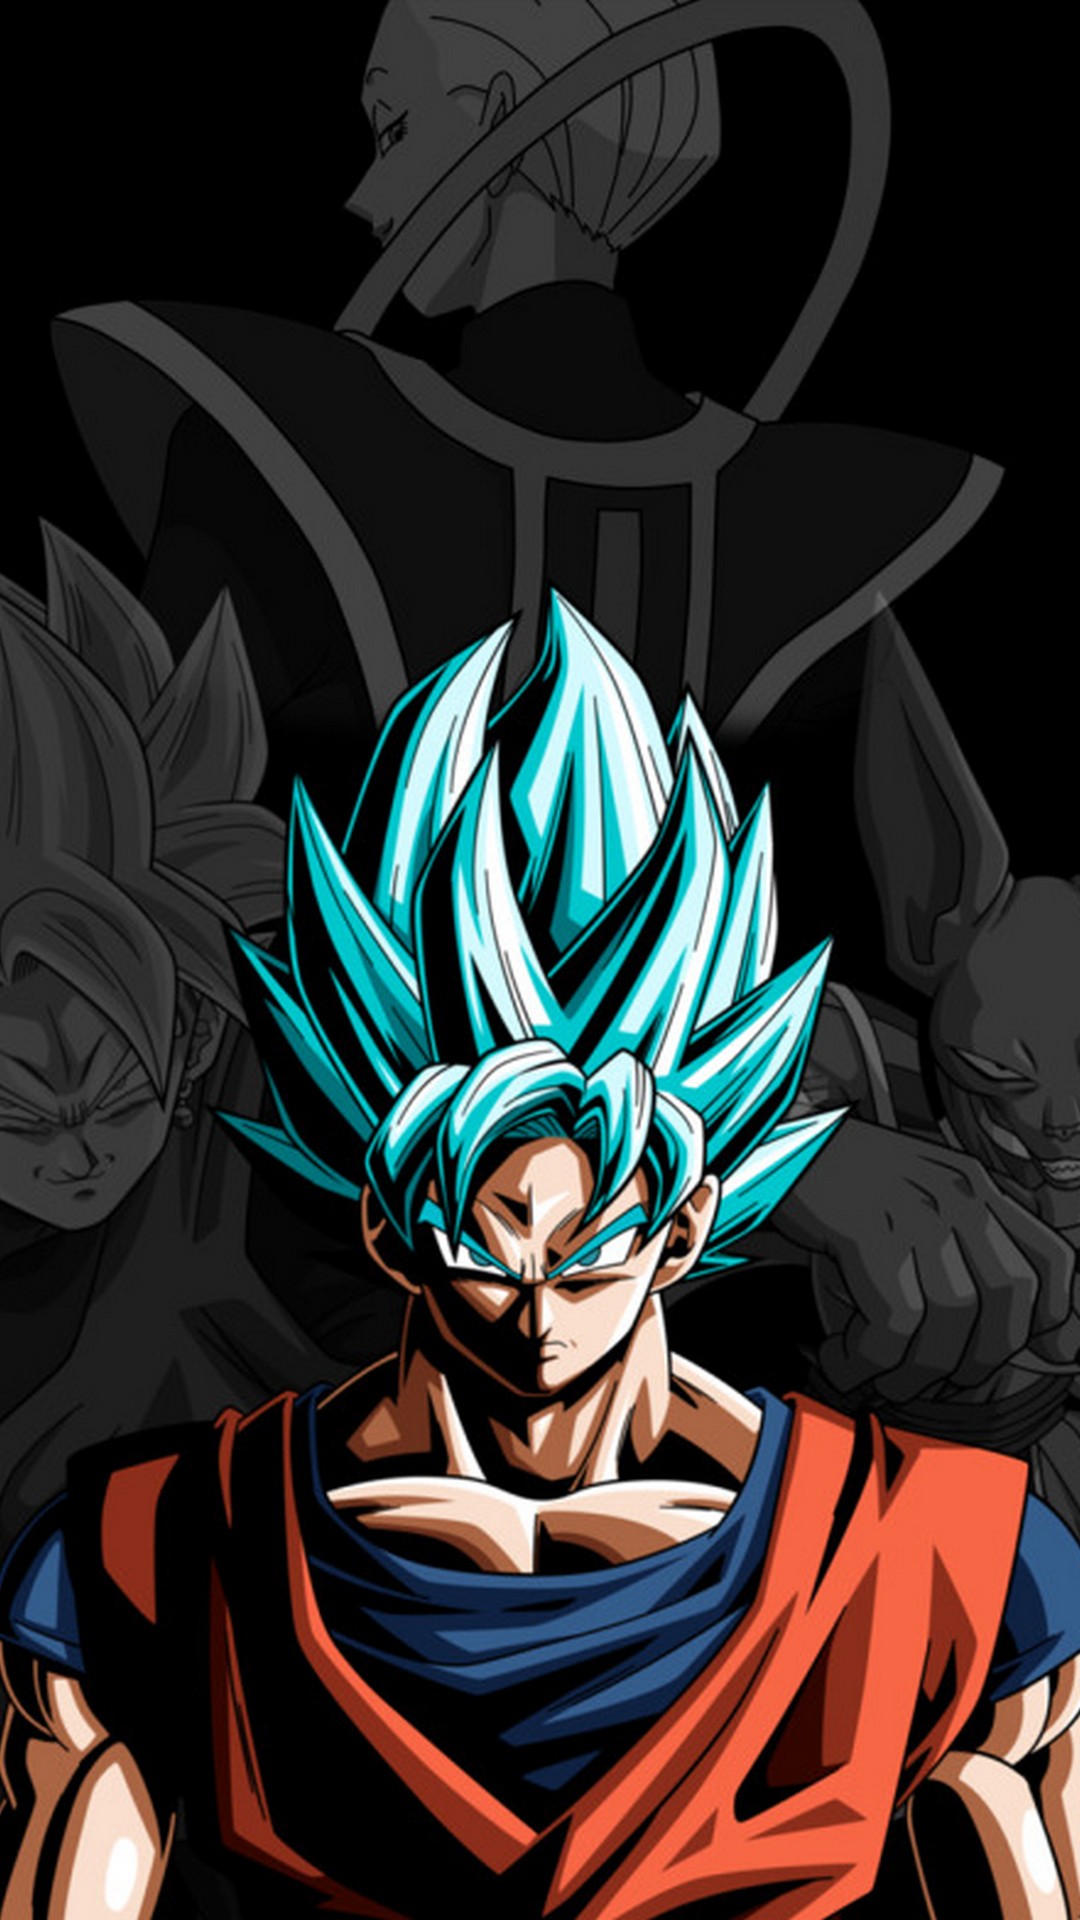 iPhone Wallpaper Goku SSJ with resolution 1080X1920 pixel. You can make this wallpaper for your iPhone 5, 6, 7, 8, X backgrounds, Mobile Screensaver, or iPad Lock Screen